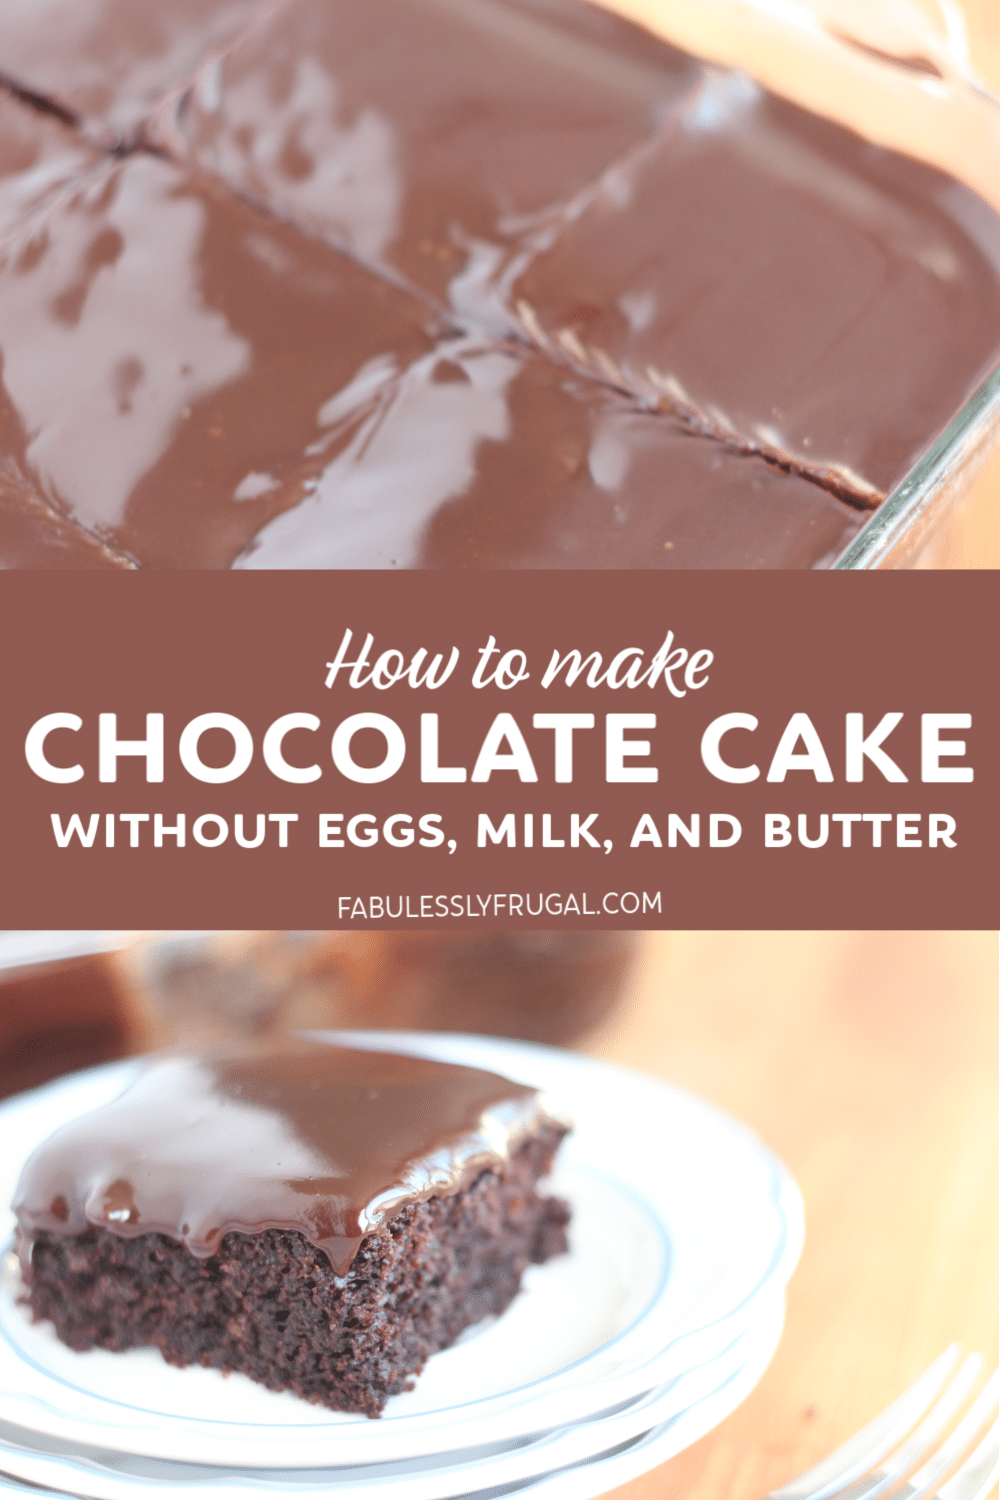 How to make chocolate cake without eggs, milk, and butter